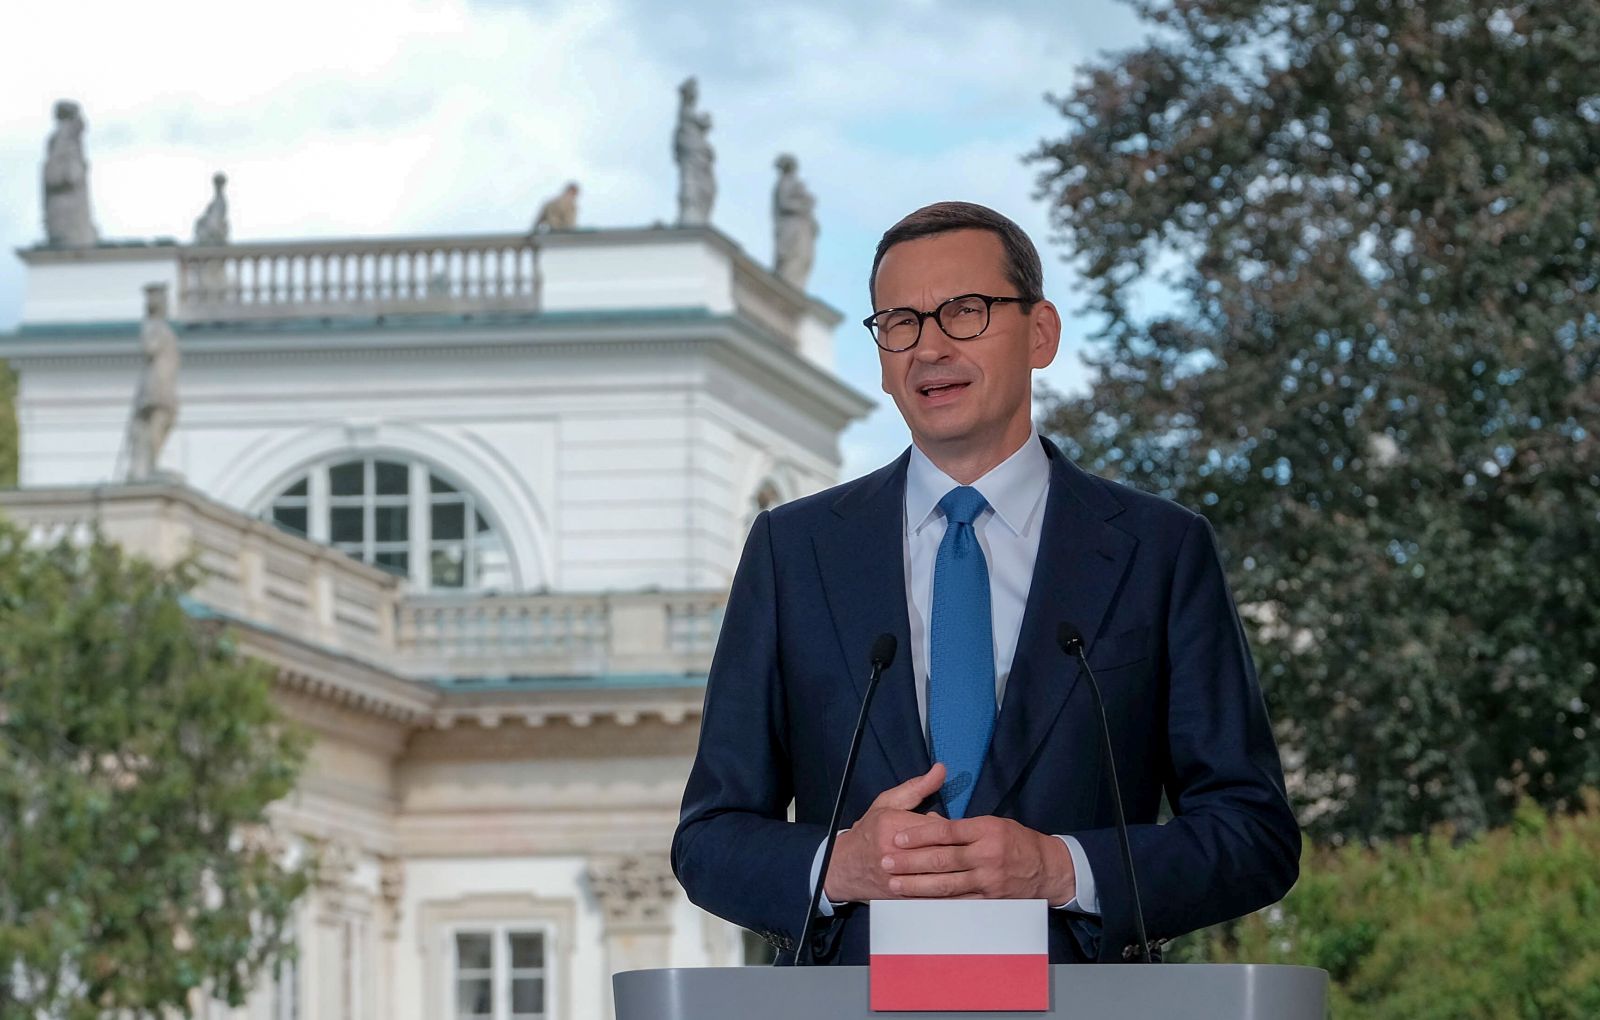 epa10093931 Polish Prime Minister Mateusz Morawiecki (R) and Spanish Prime Minister Pedro Sanchez (L) during a joint press conference at the Palace on the Island at the Royal Lazienki Park in Warsaw, Poland, 27 July 2022. Polish-Spanish intergovernmental consultations are underway.  EPA/MATEUSZ MAREK POLAND OUT